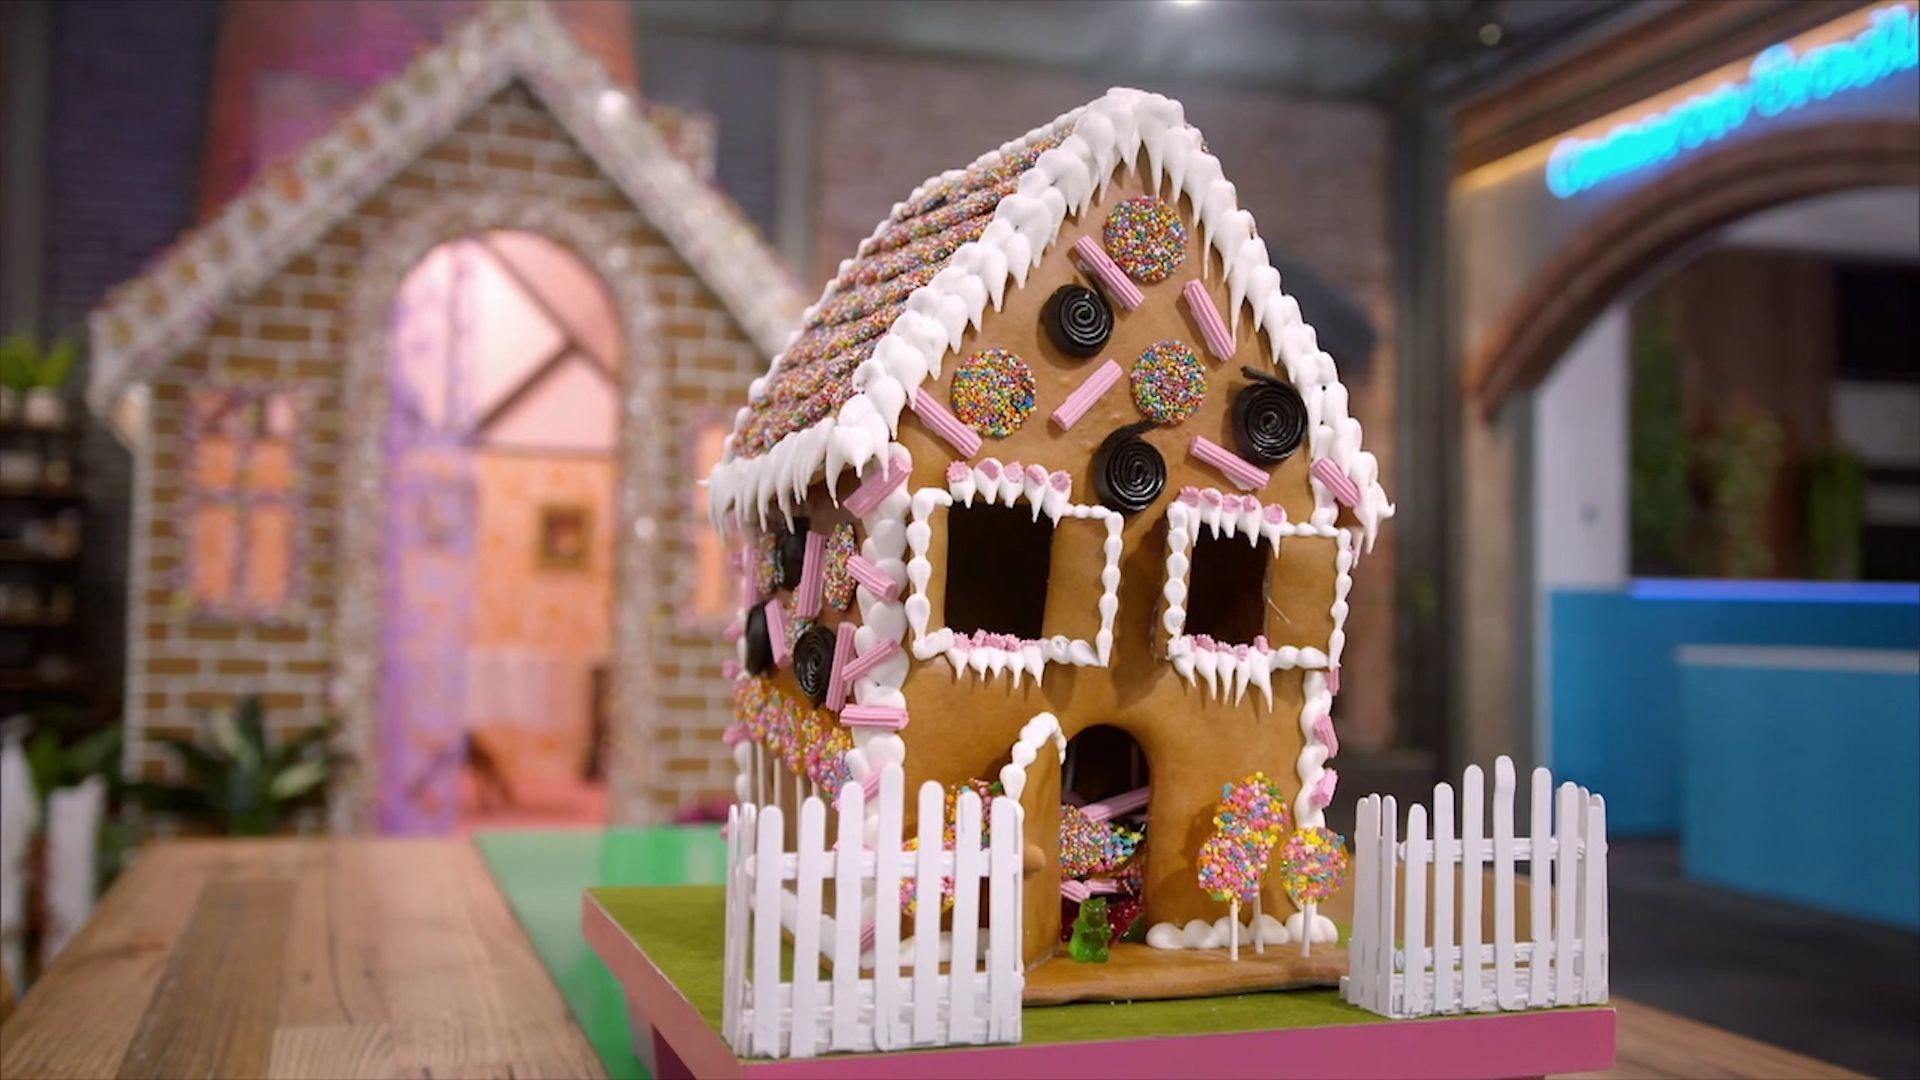 1920x1080 Most amazing gingerbread house you've ever seen: Family Food Fight Season  2, Short Video